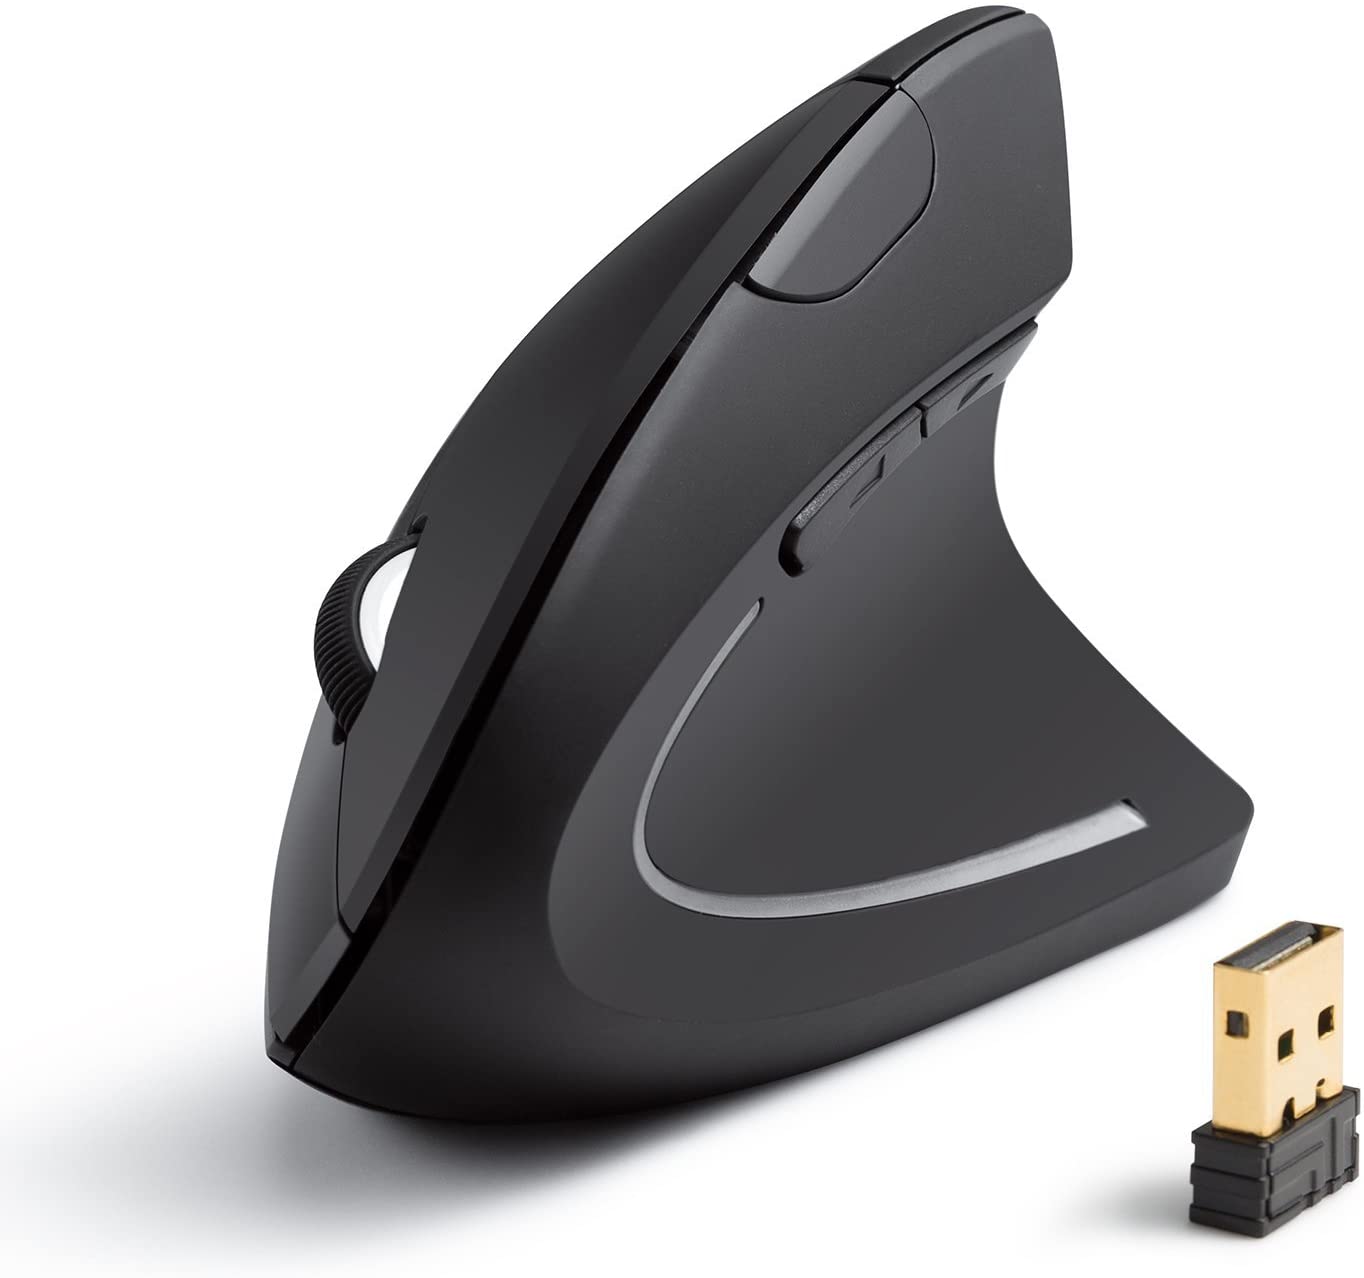 Best Laptop Mouse for 2020: 10 Computer and Laptop Mice to Own